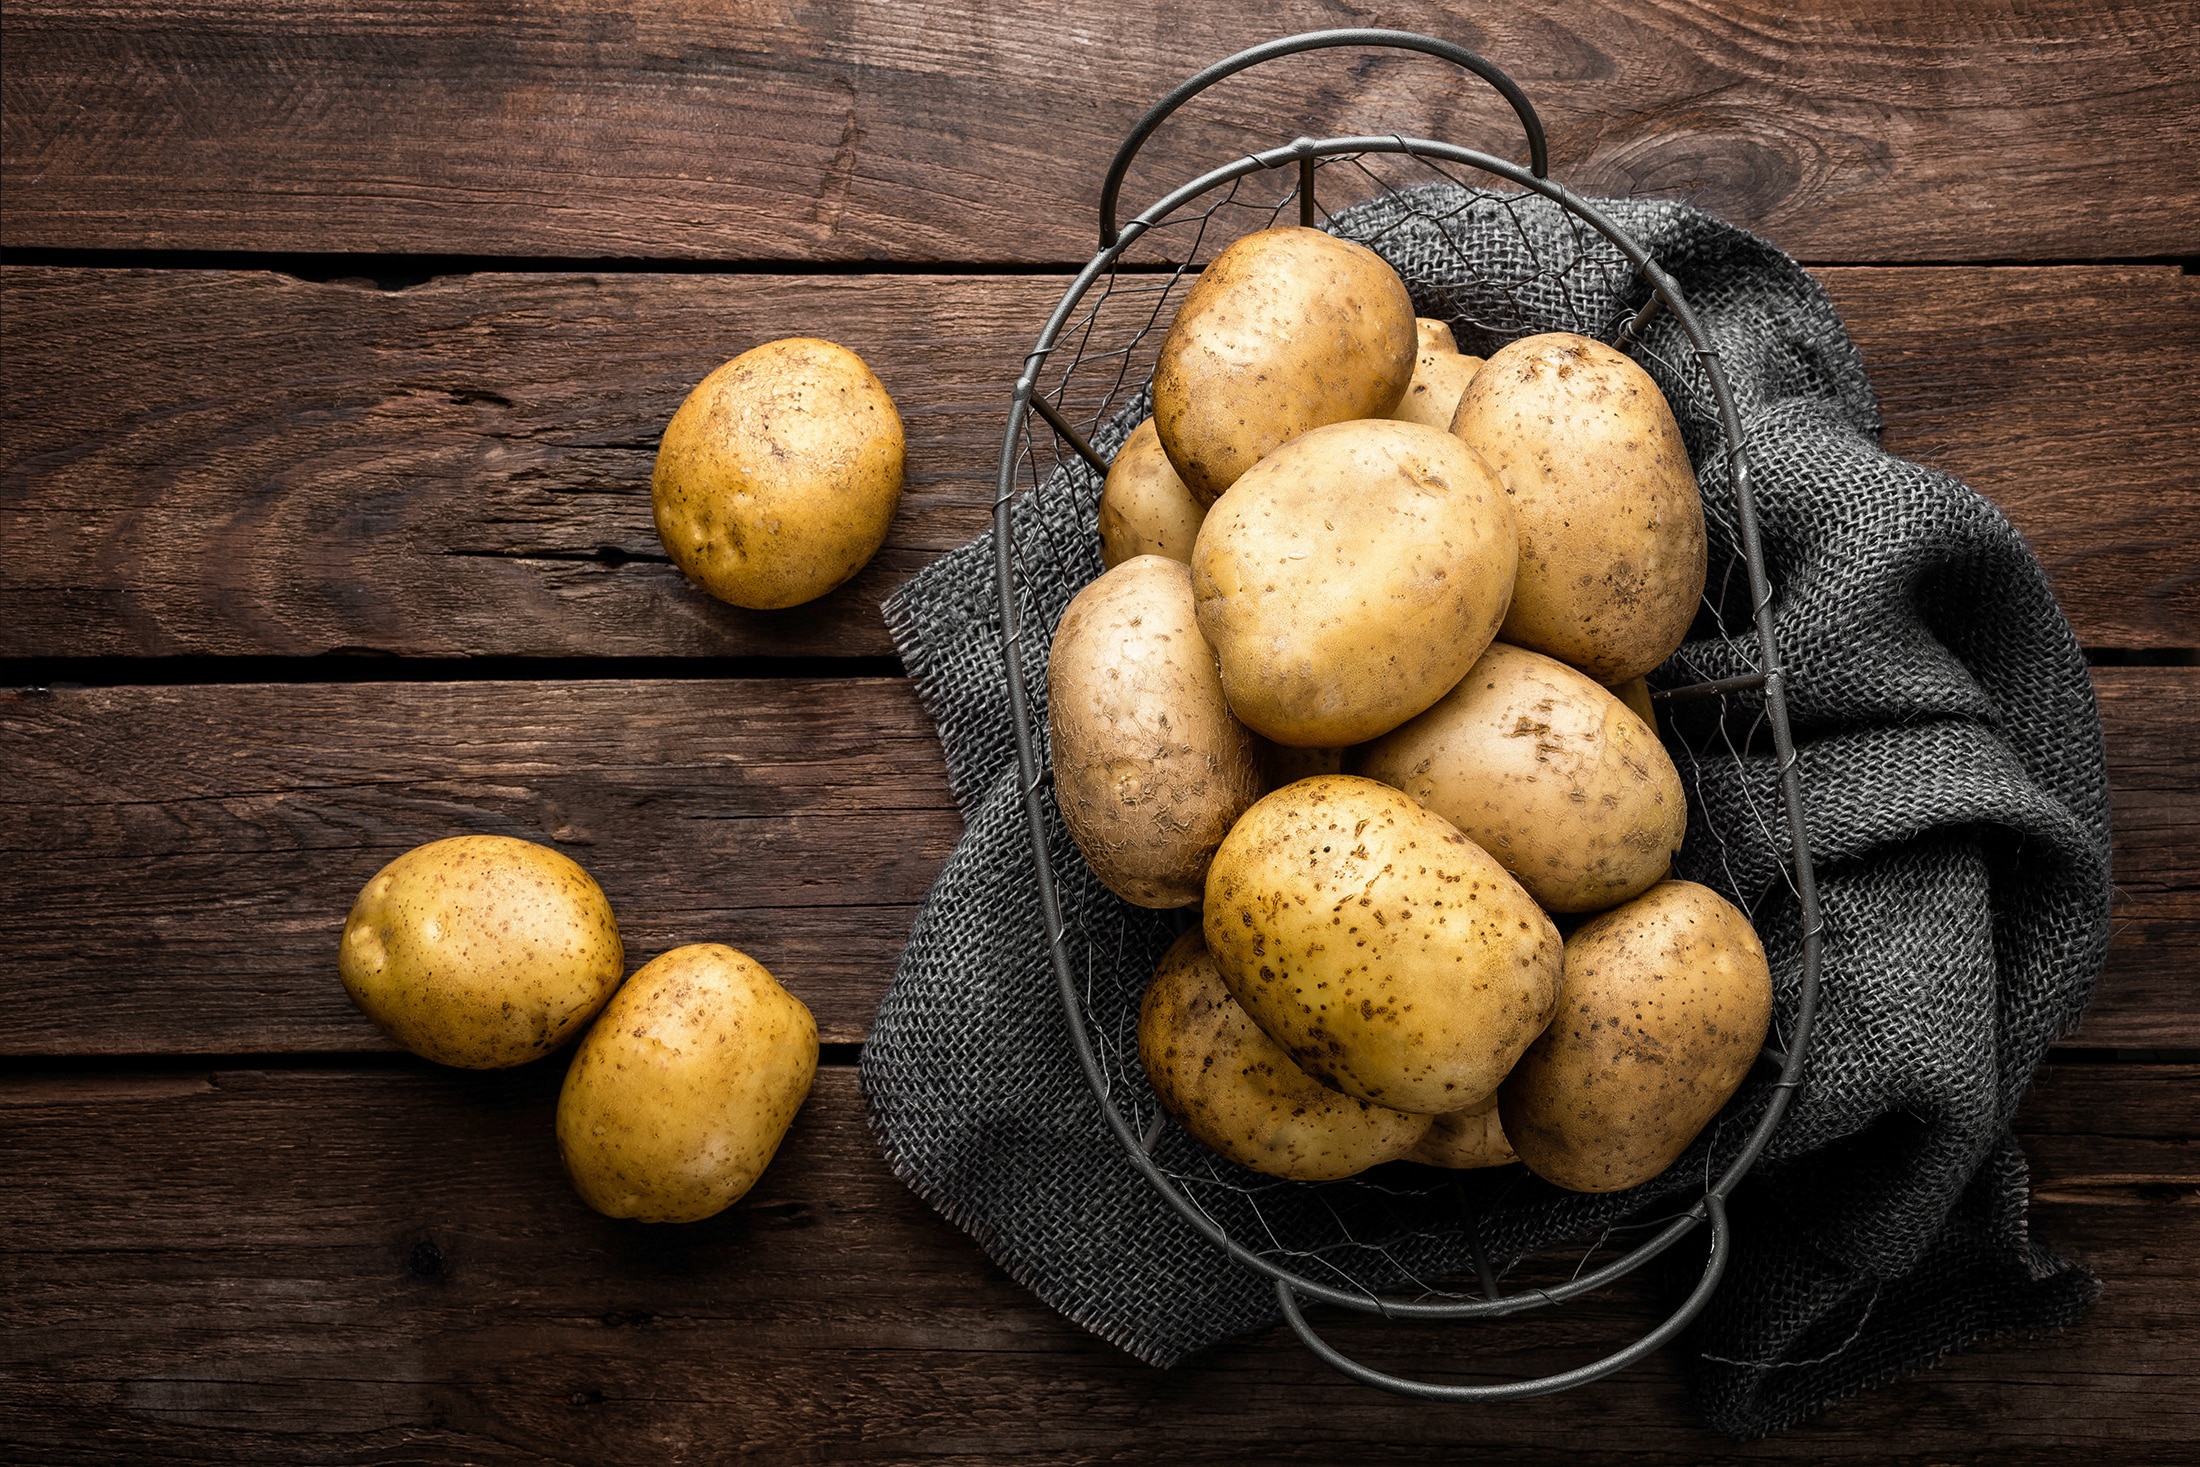 A metal basket full of potatoes on a wooden surface